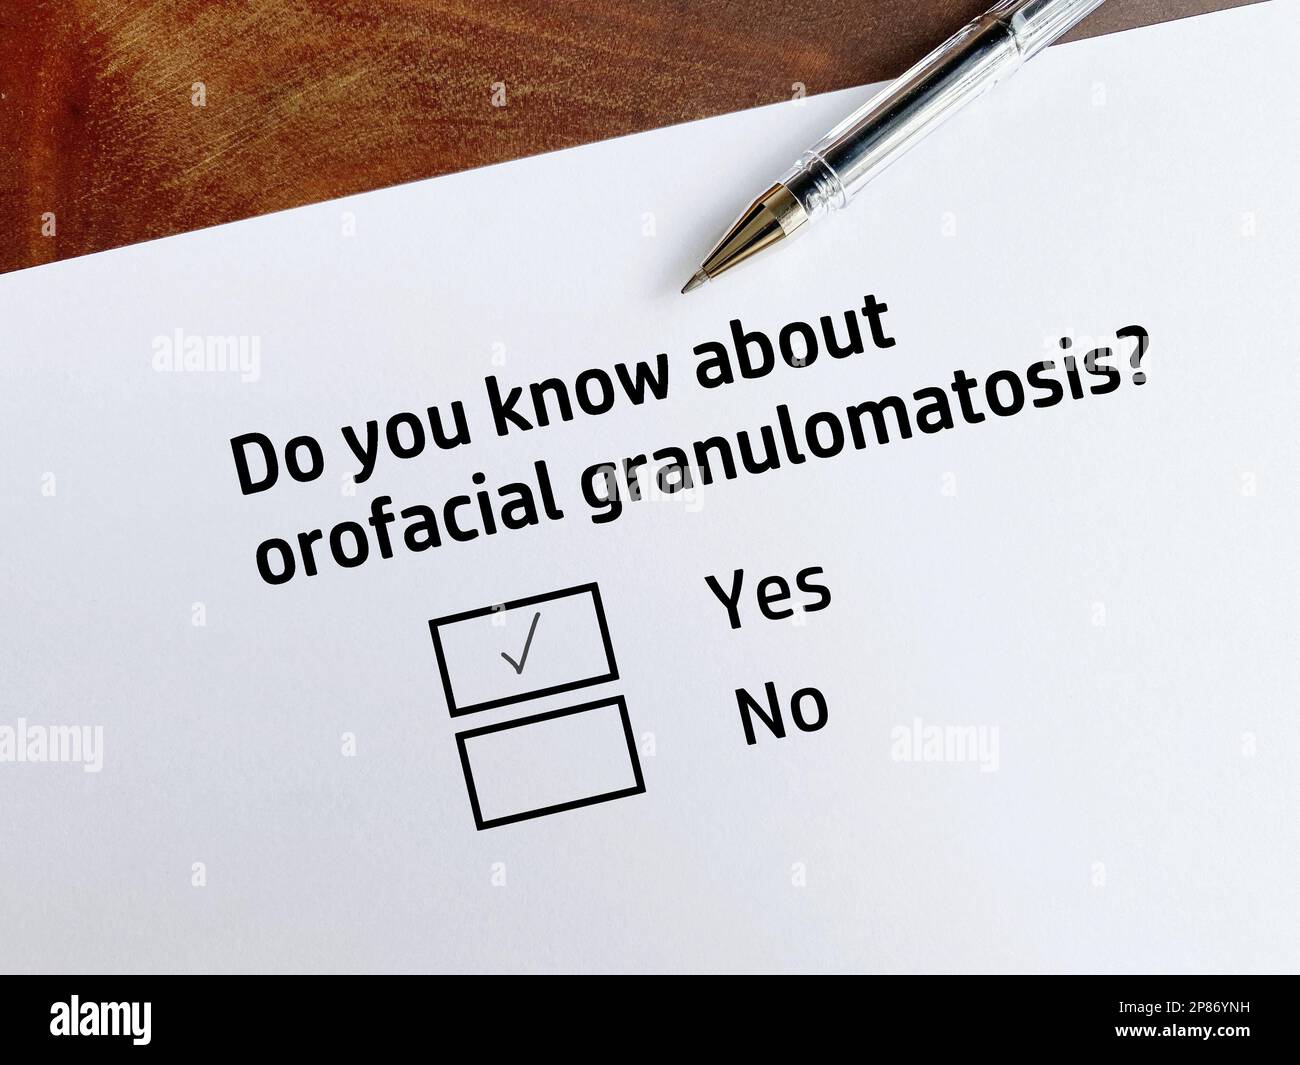 One person is answering question about dental care. She knows about orofacial granulomatosis. Stock Photo